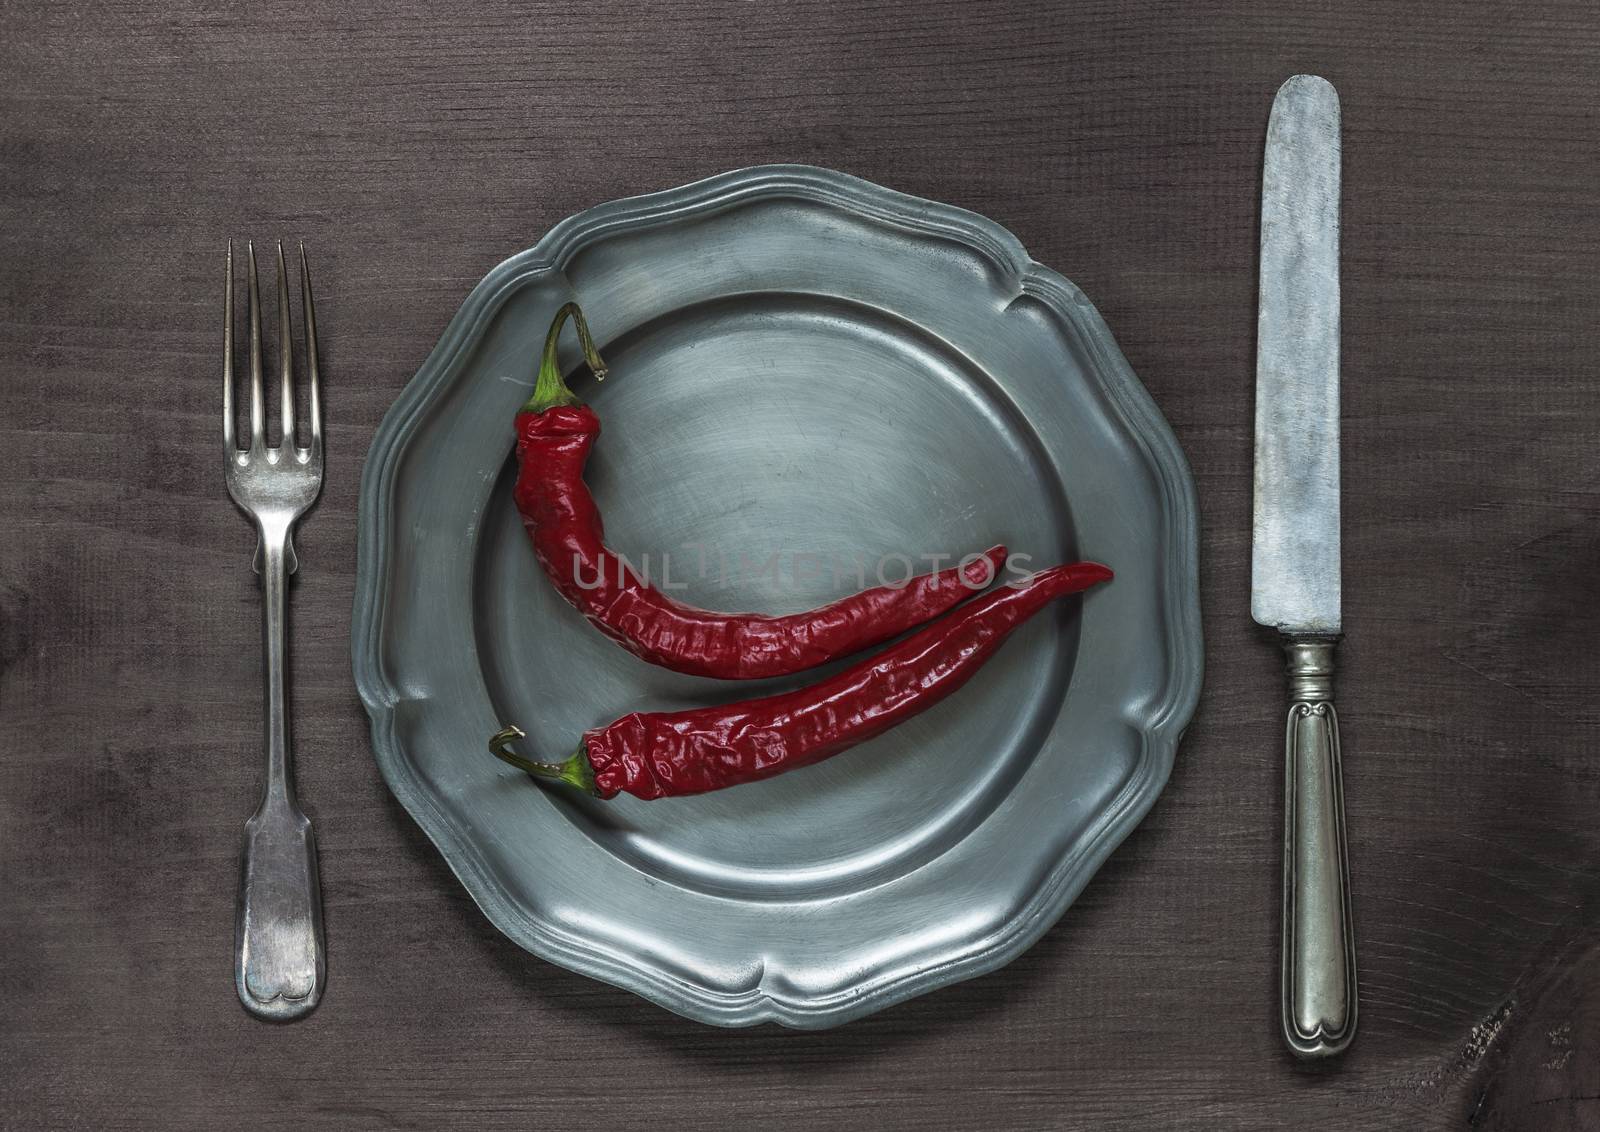 Chilli peppers on pewter plate by Epitavi